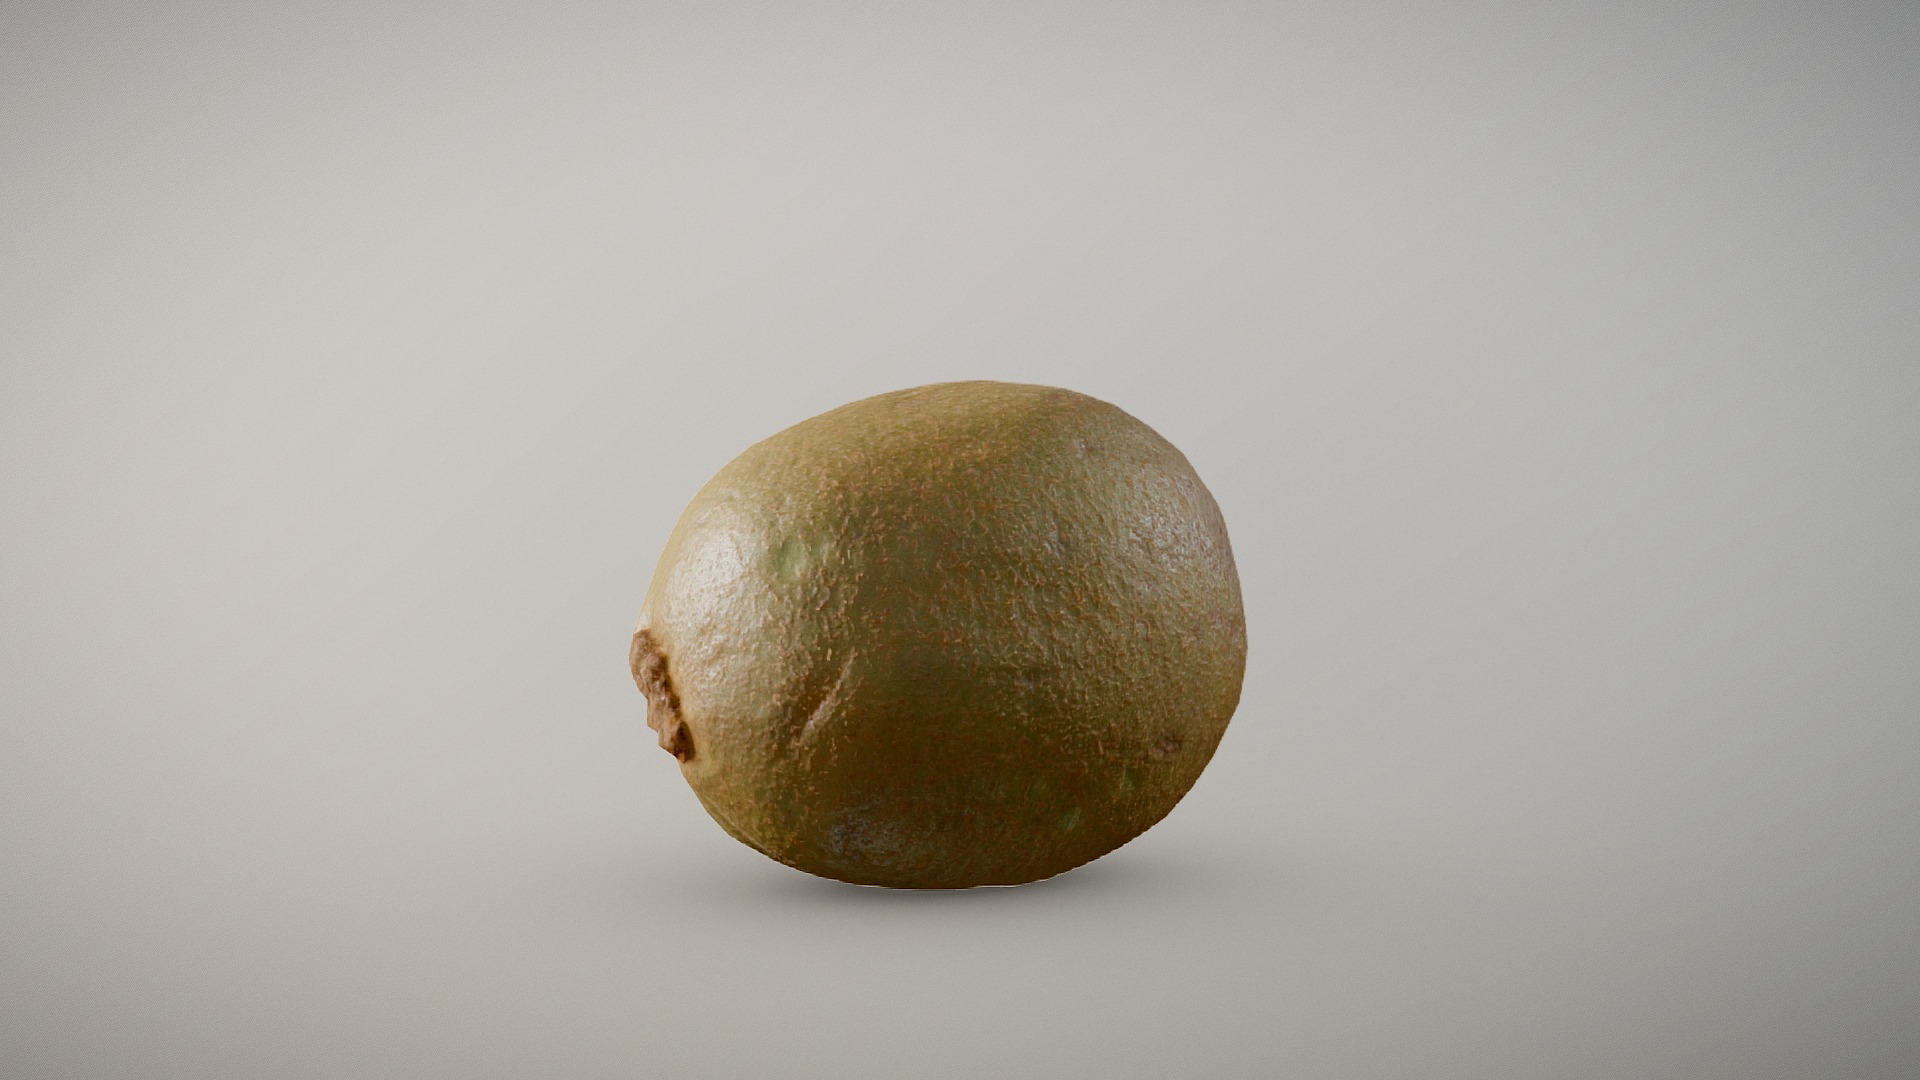 3D model Chile’s Kiwi - This is a 3D model of the Chile's Kiwi. The 3D model is about a yellow potato on a white surface.